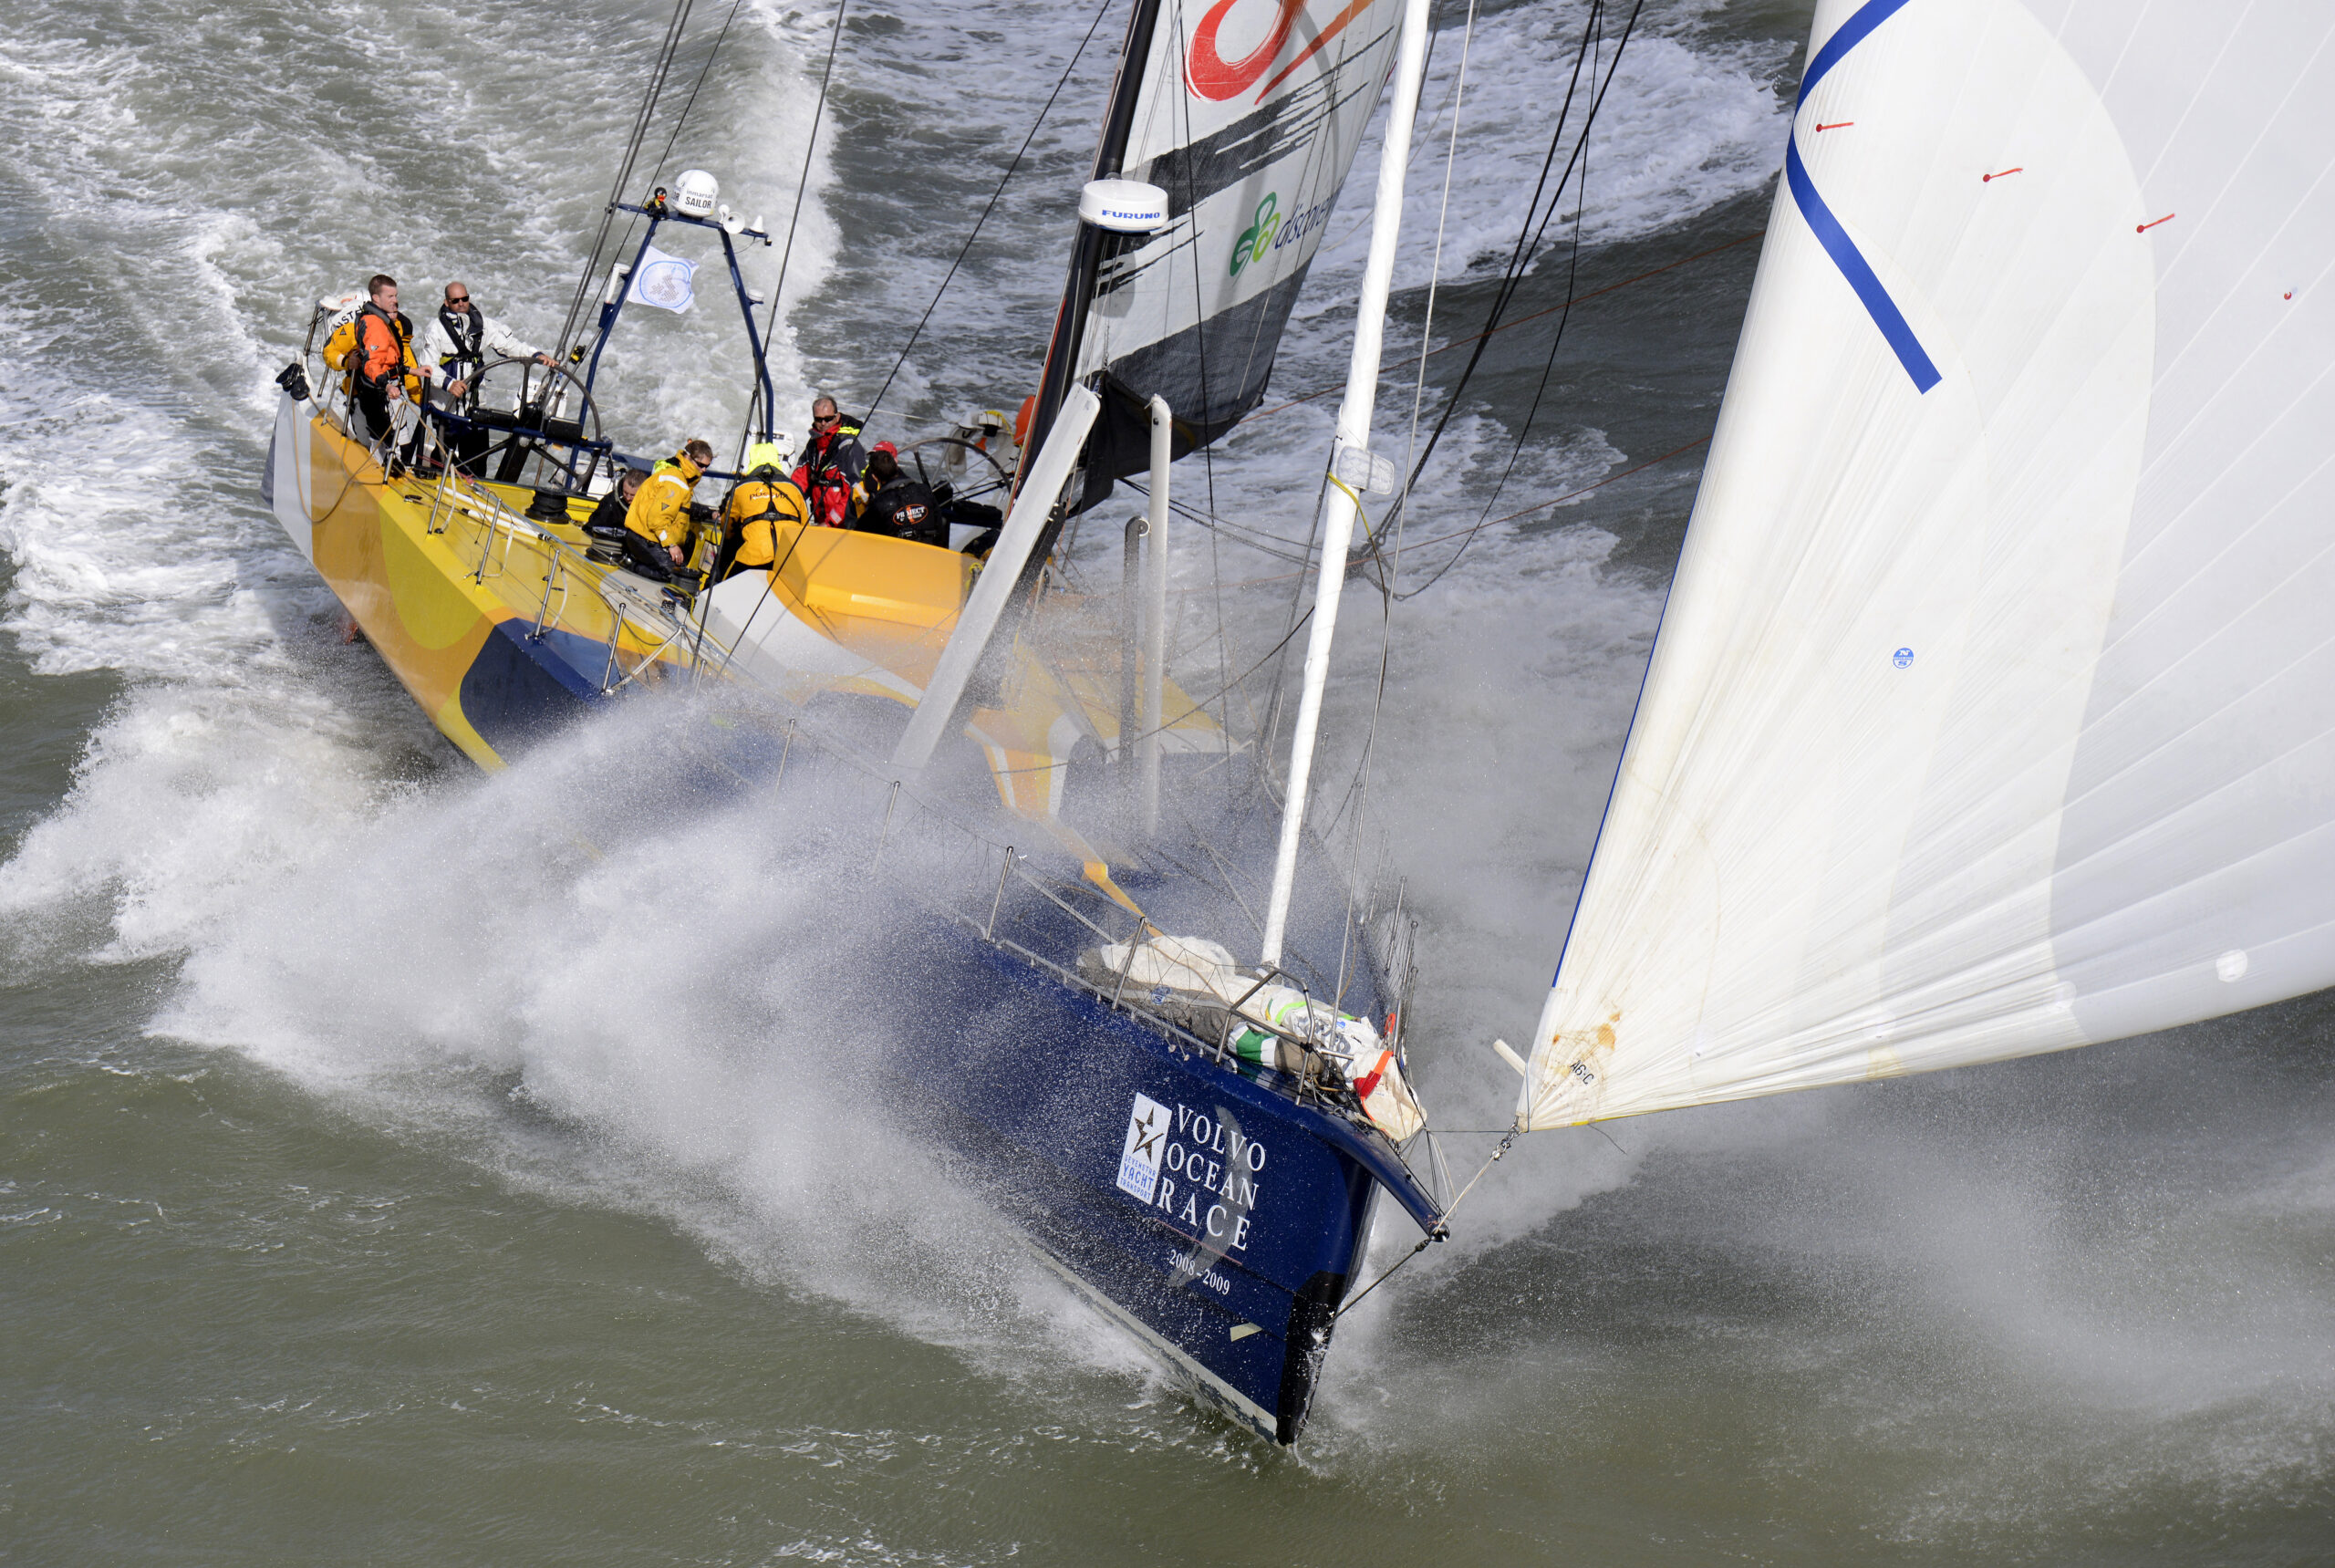 Sevenstar Round Britain and Ireland Race 2014

Strictly only editorial free usage for the promotion of the Sevenstar Round Britain and Ireland Race 2014 and the Volvo Ocean Race in editorial publications and web site.